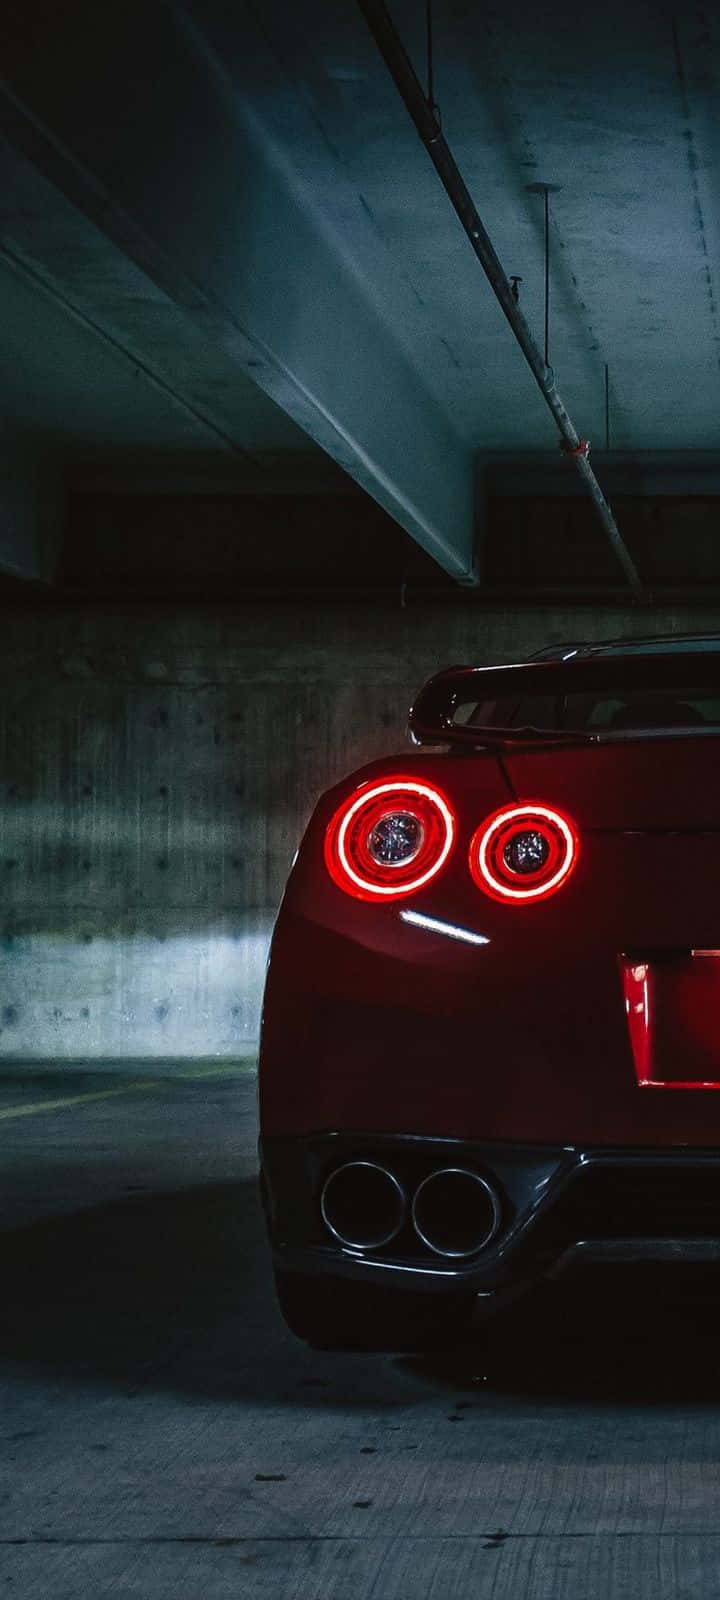 Unleash Your Power with a Nissan Skyline Wallpaper